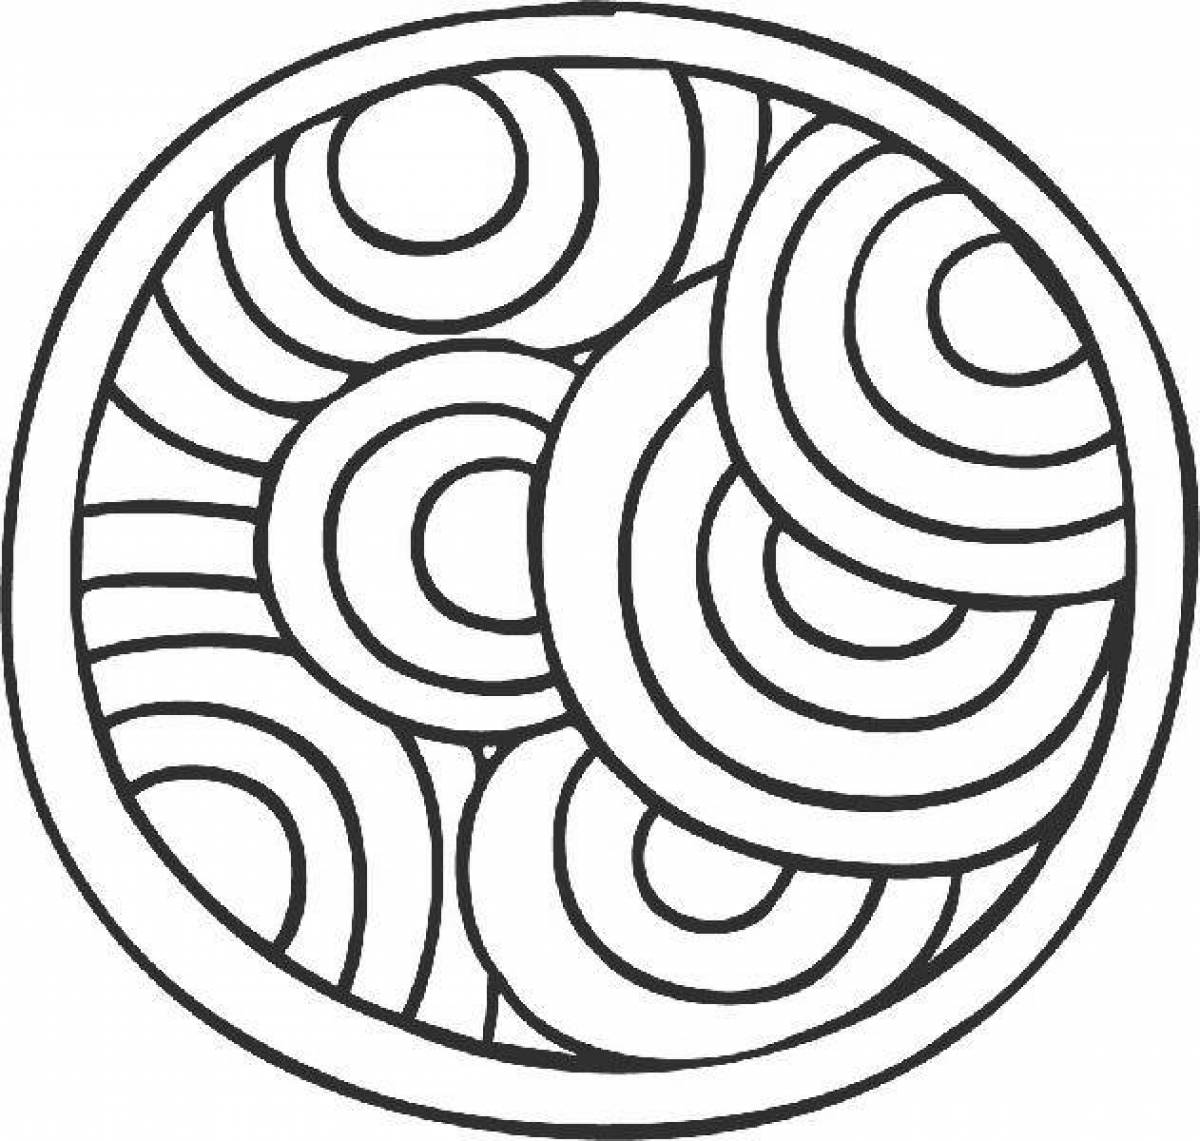 Great creation of a spiral coloring page